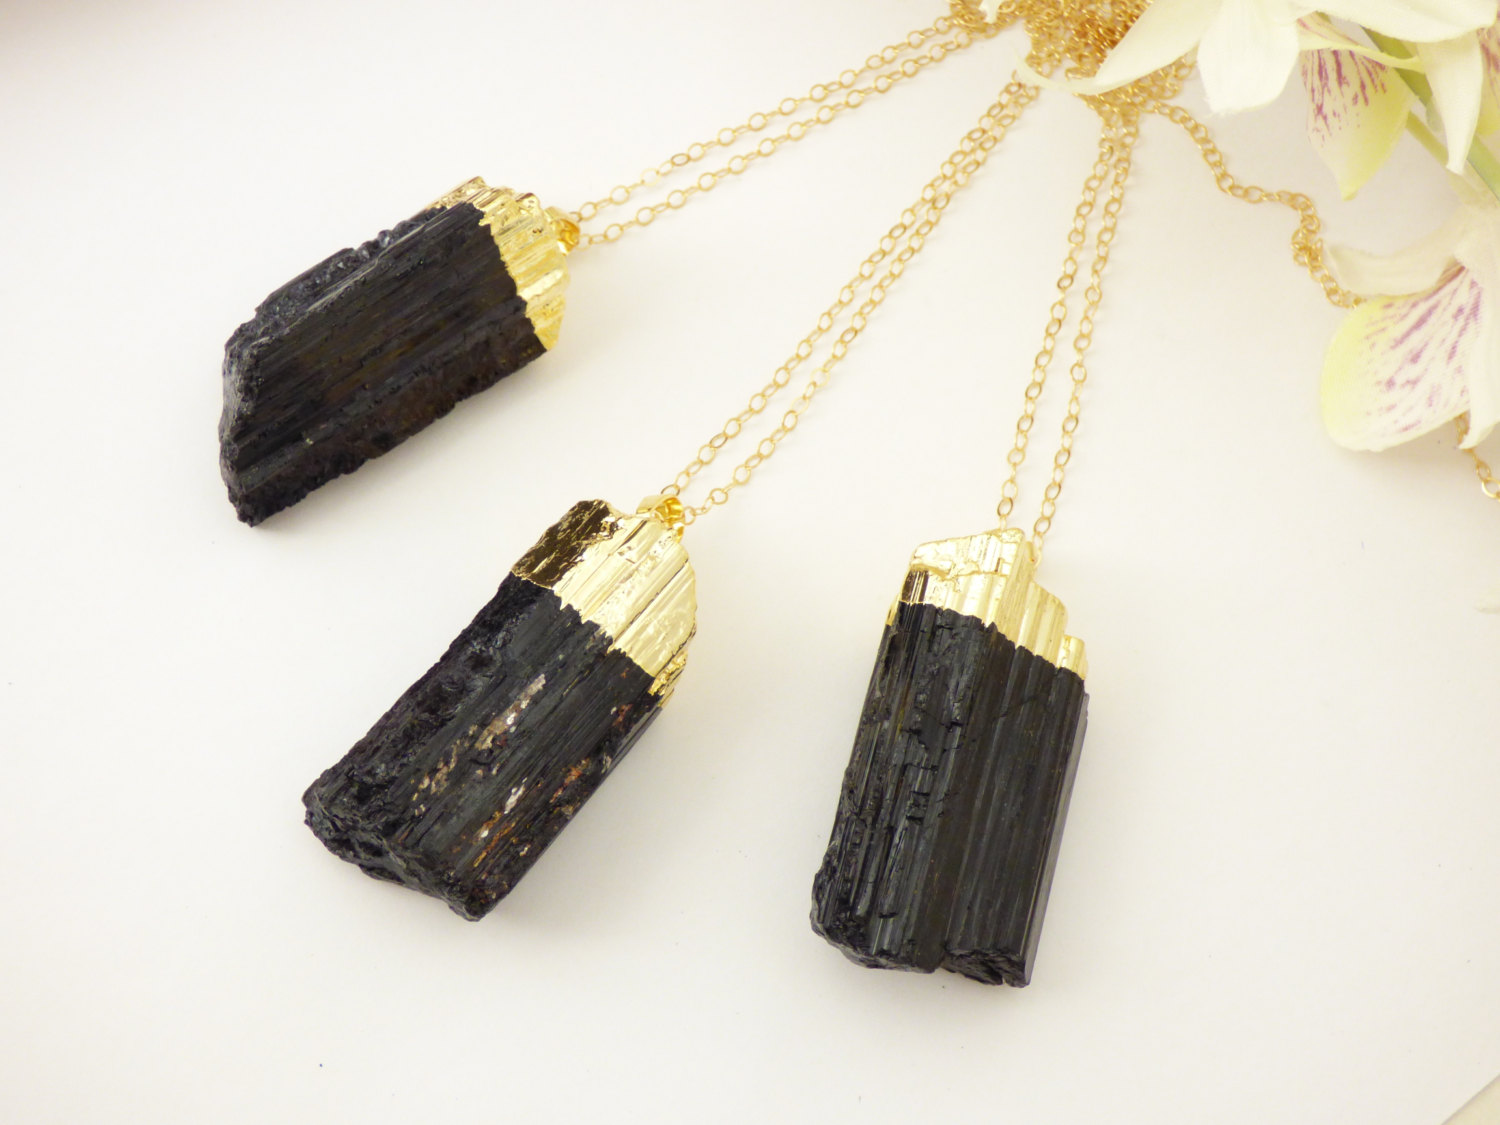 Mineral & Rough Stone Necklaces Etsy SweetDreamstyle